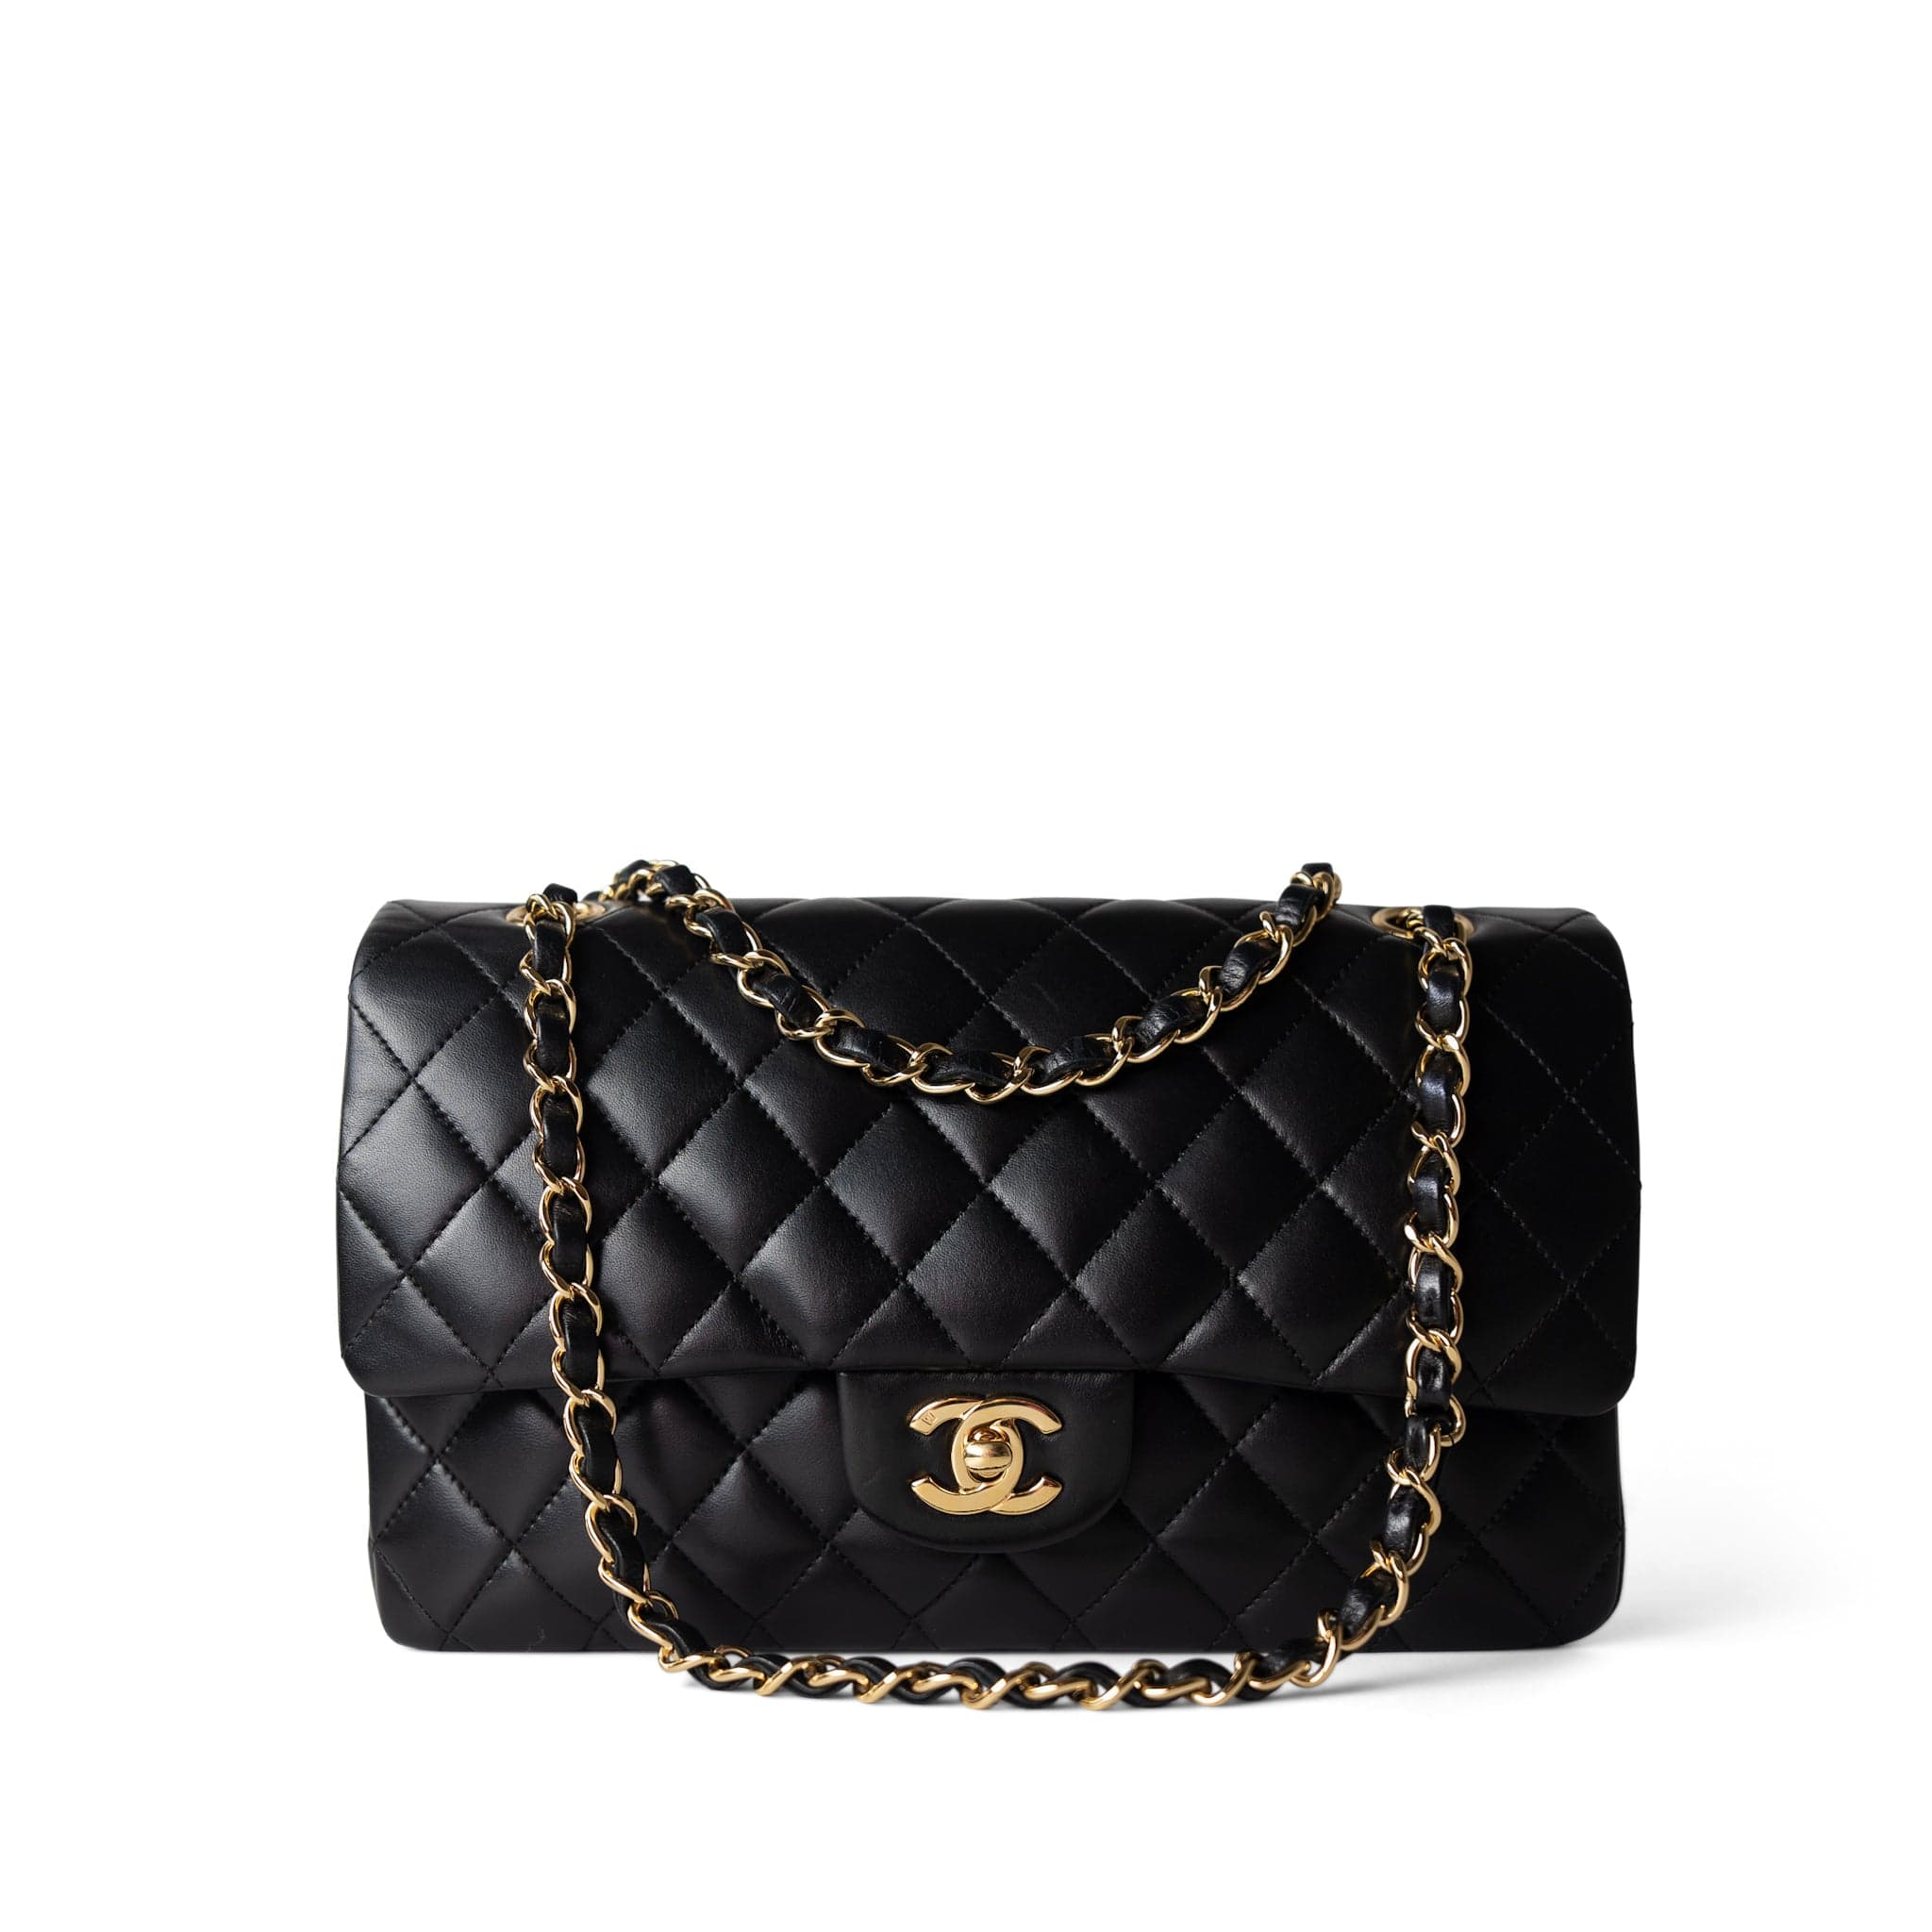 CHANEL Handbag Black / Classic flap Vintage Black Lambskin Quilted Classic Flap Medium Gold Hardware - Redeluxe